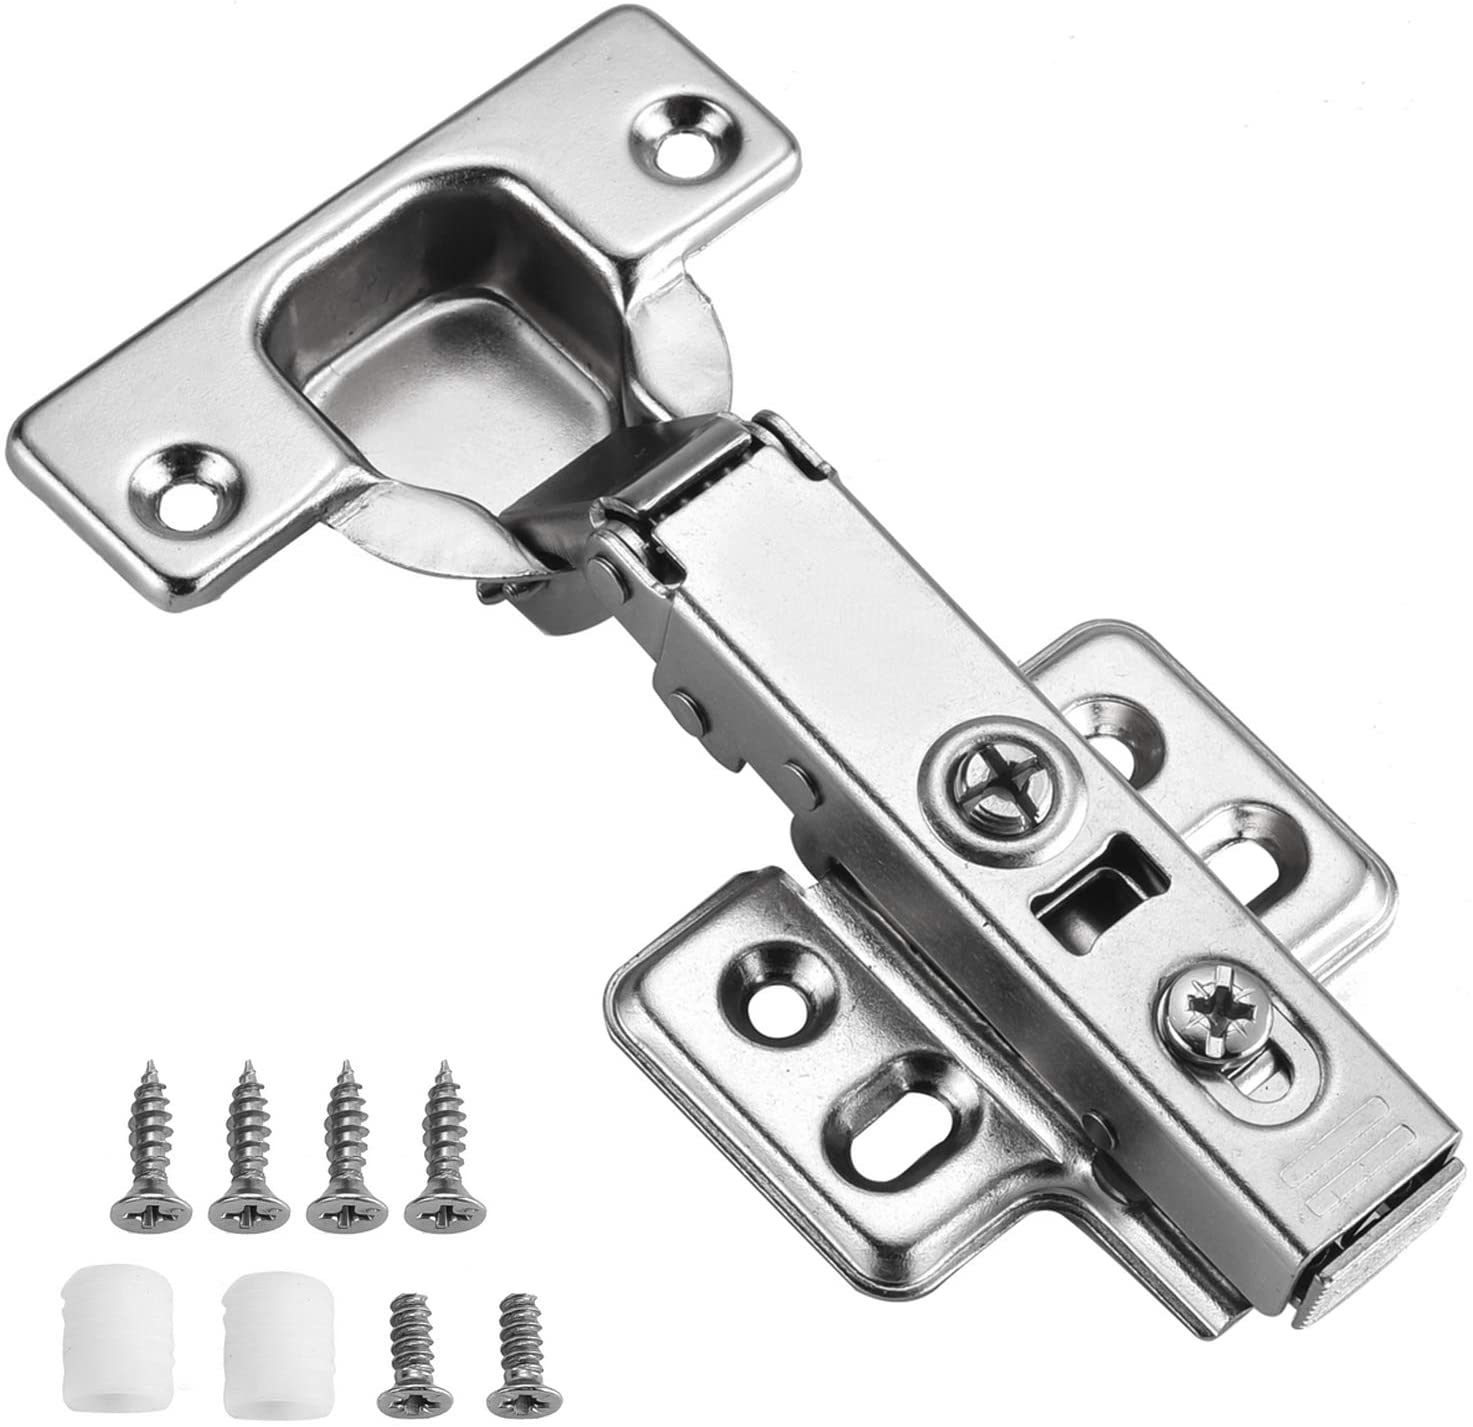 Luokim 40pcs Standard Cabinet Hinge,Fit for Frameless Cabinet,European Full Overlay,Soft Closing,Four-Hole mounting Plate Hinges,Nickel Plated Finish - image 1 of 7